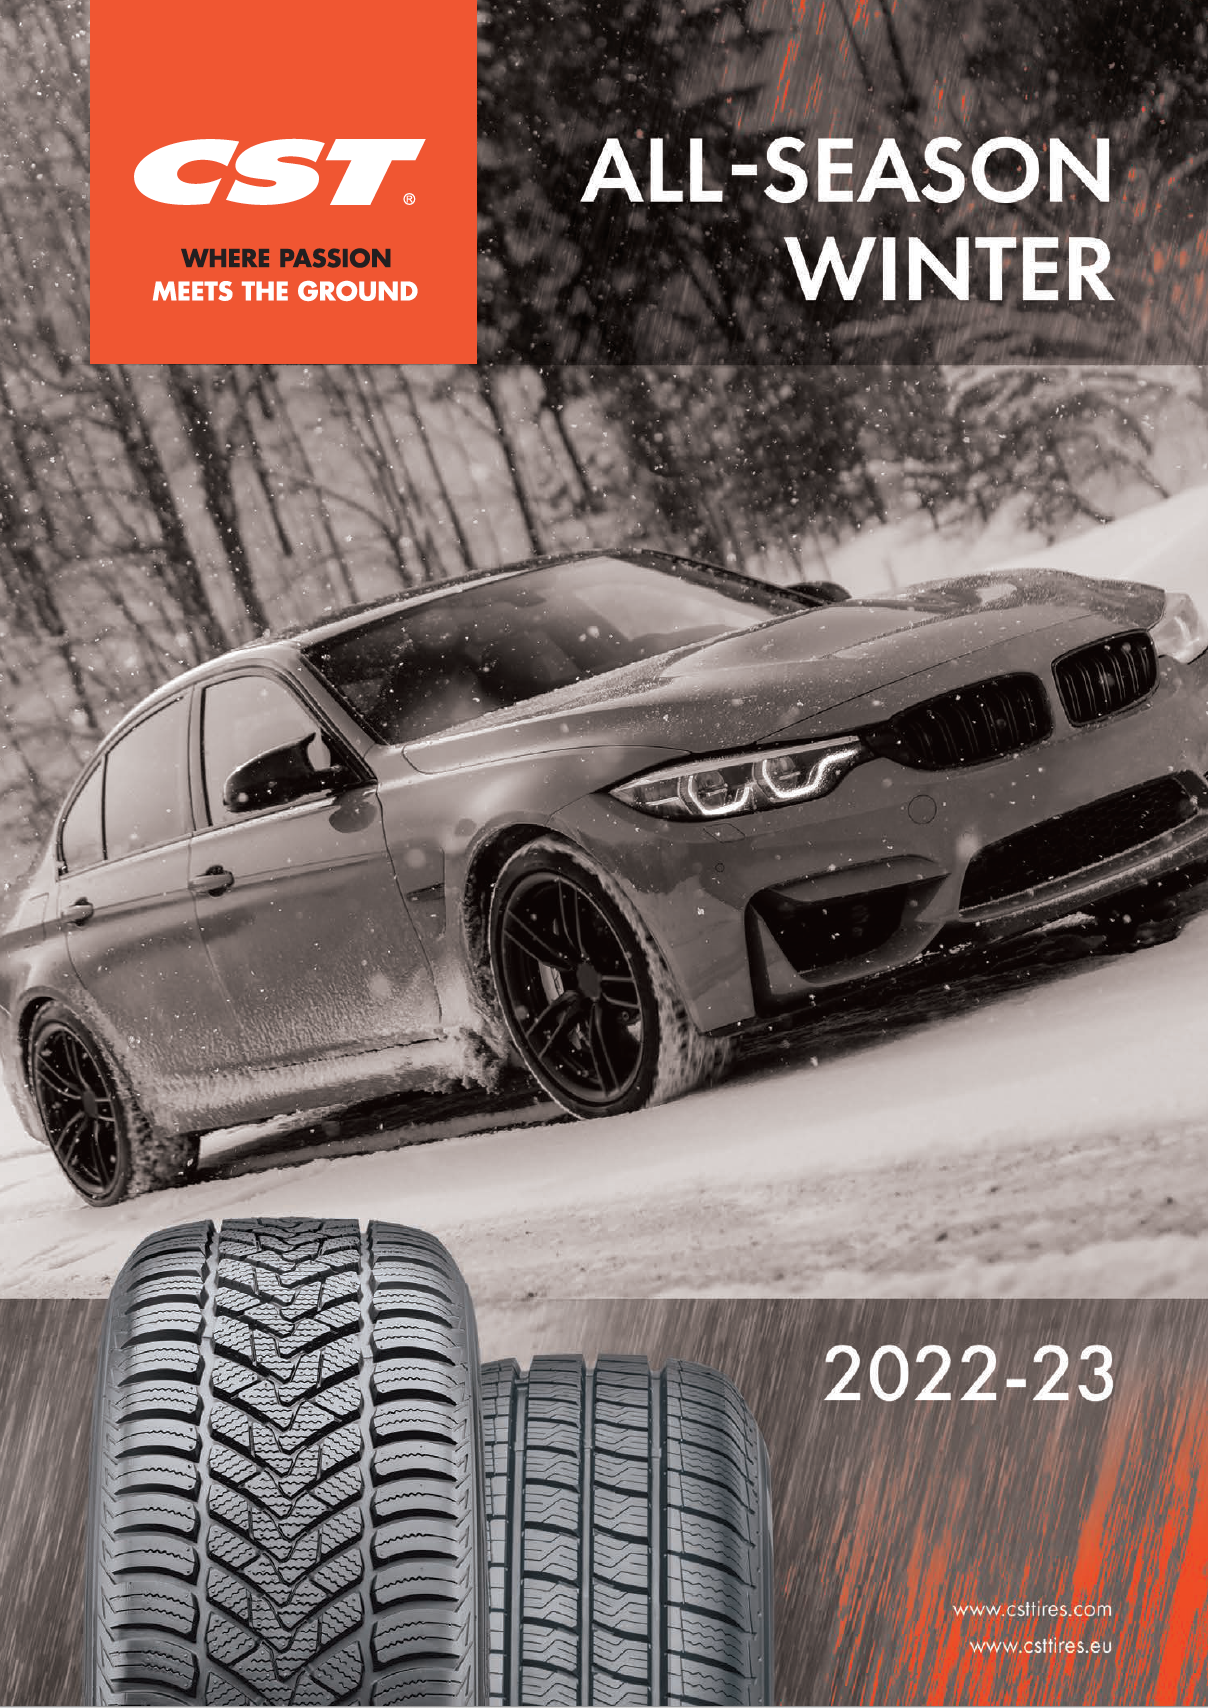 All Season Catalog cover with car and two tires